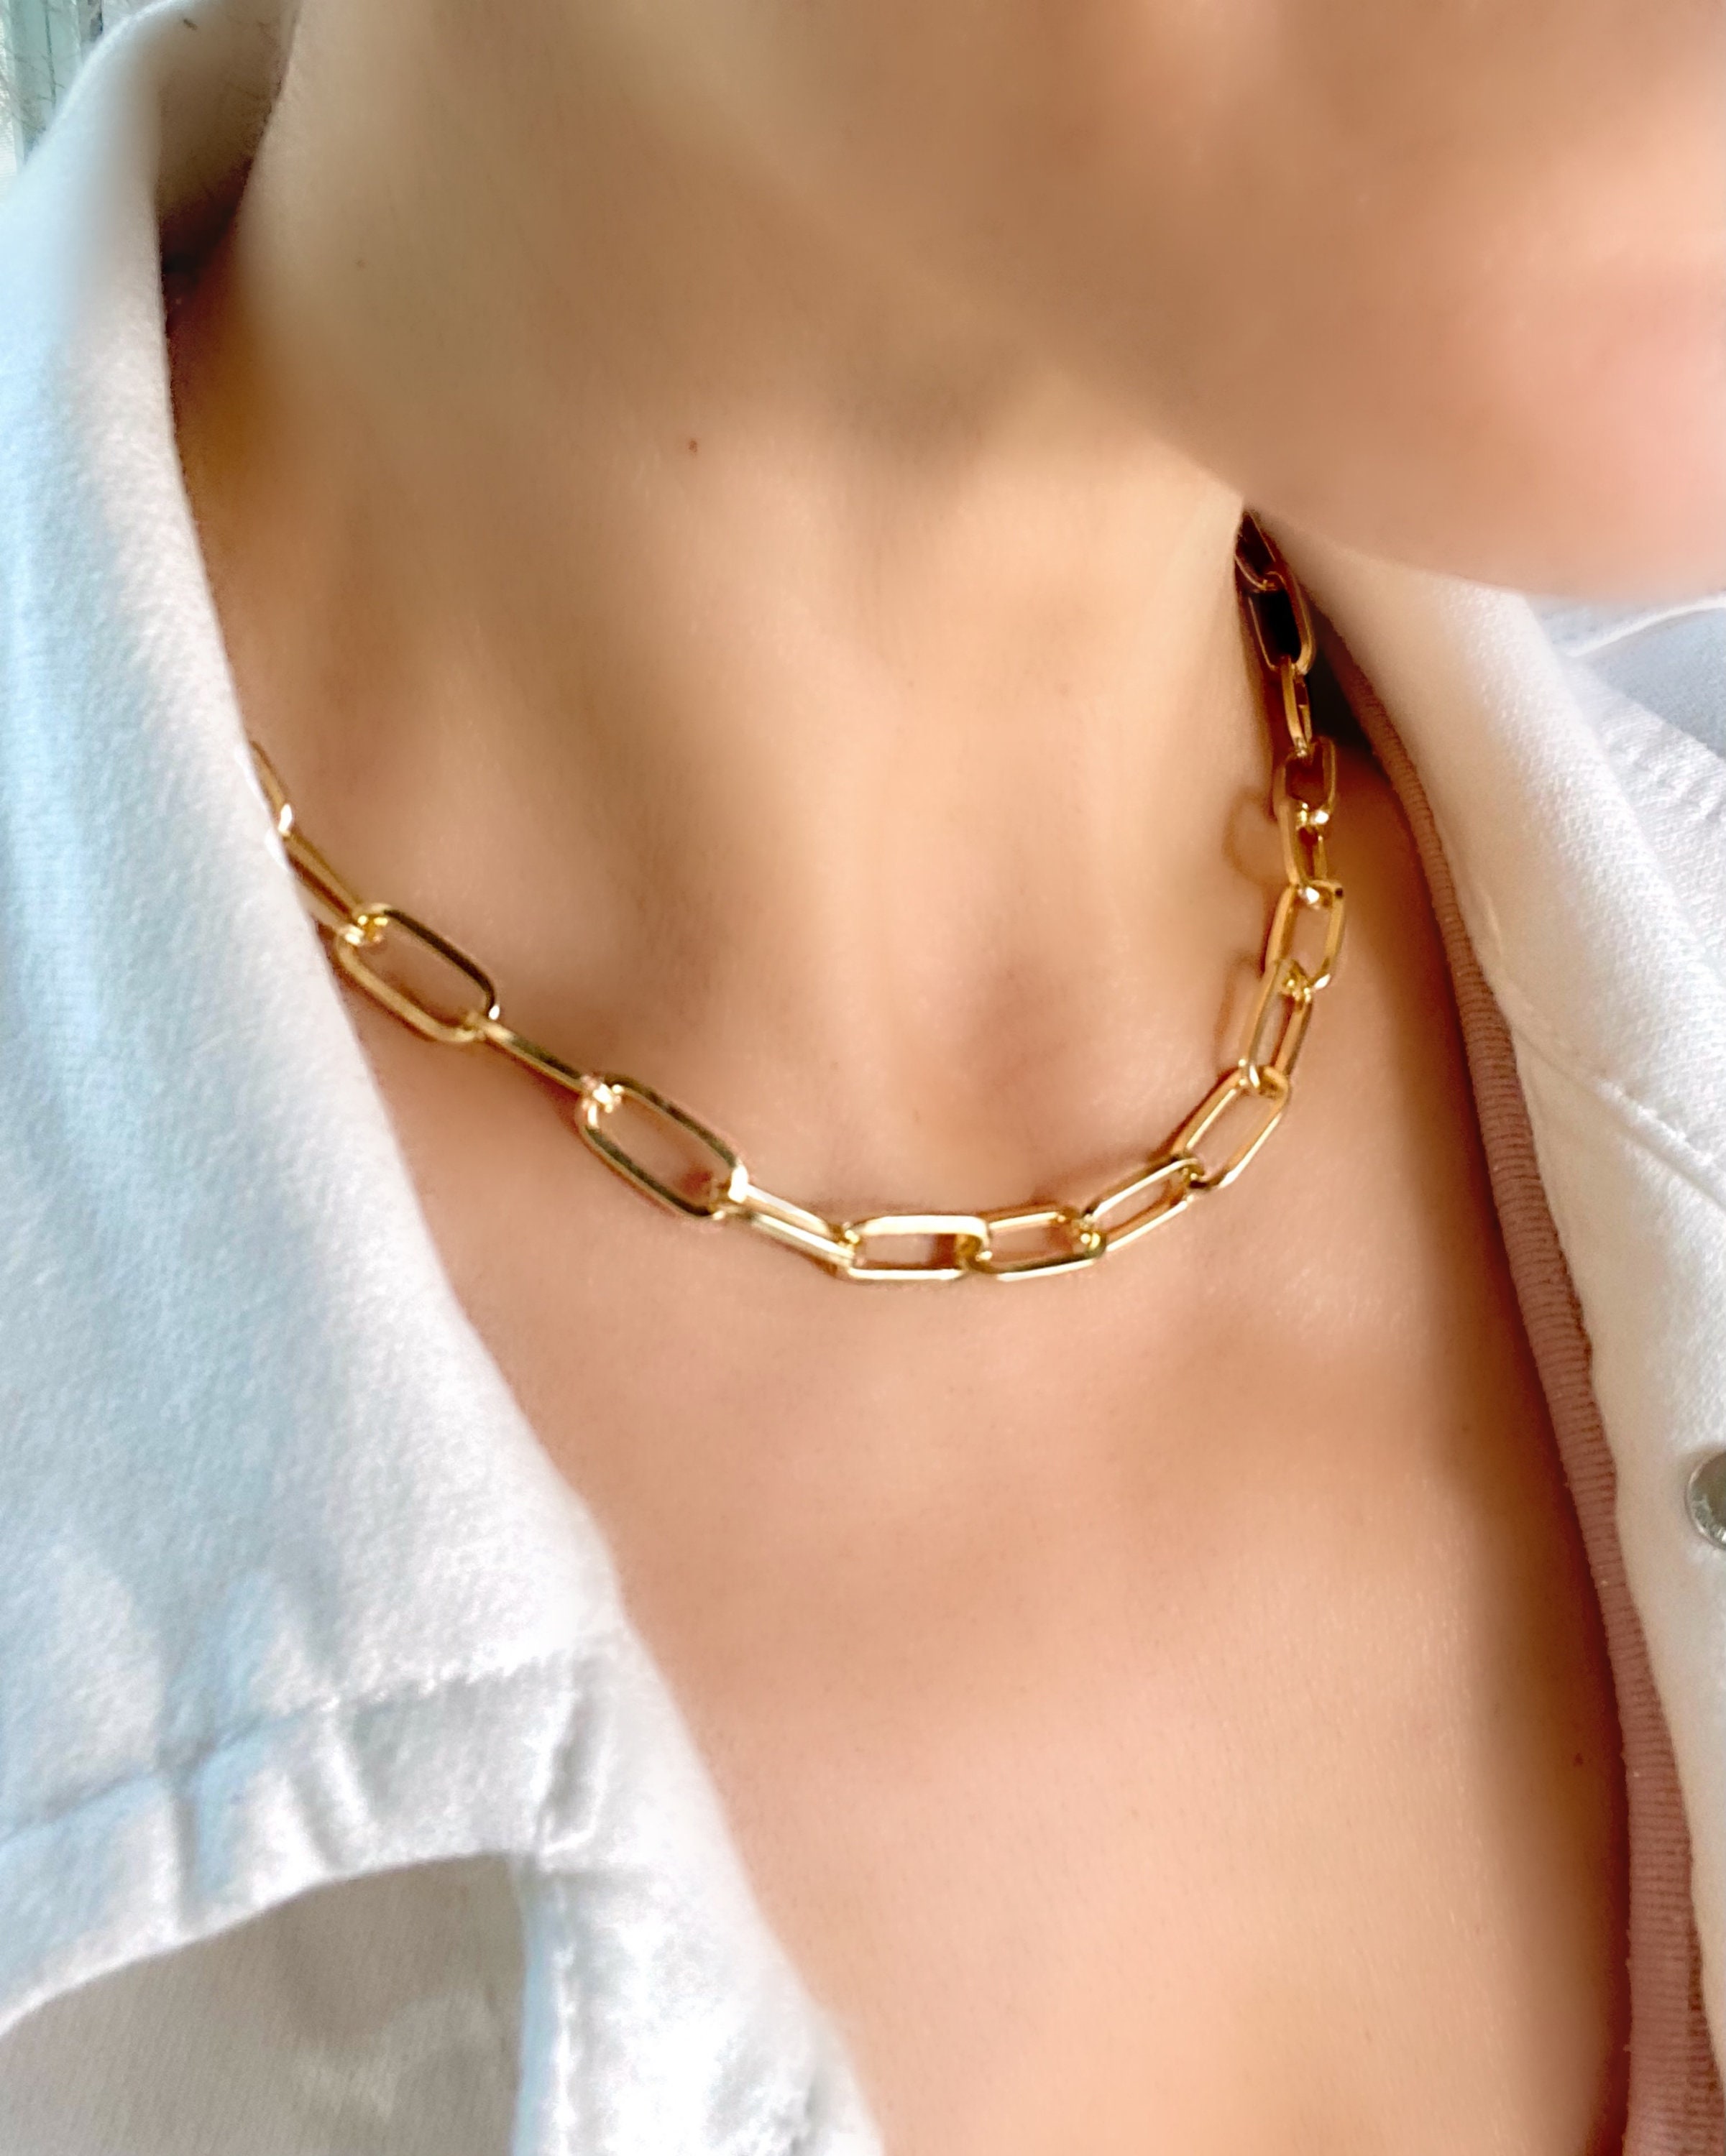 Paperclip Necklace Large Link Necklace Gold Paperclip Chain -  Sweden